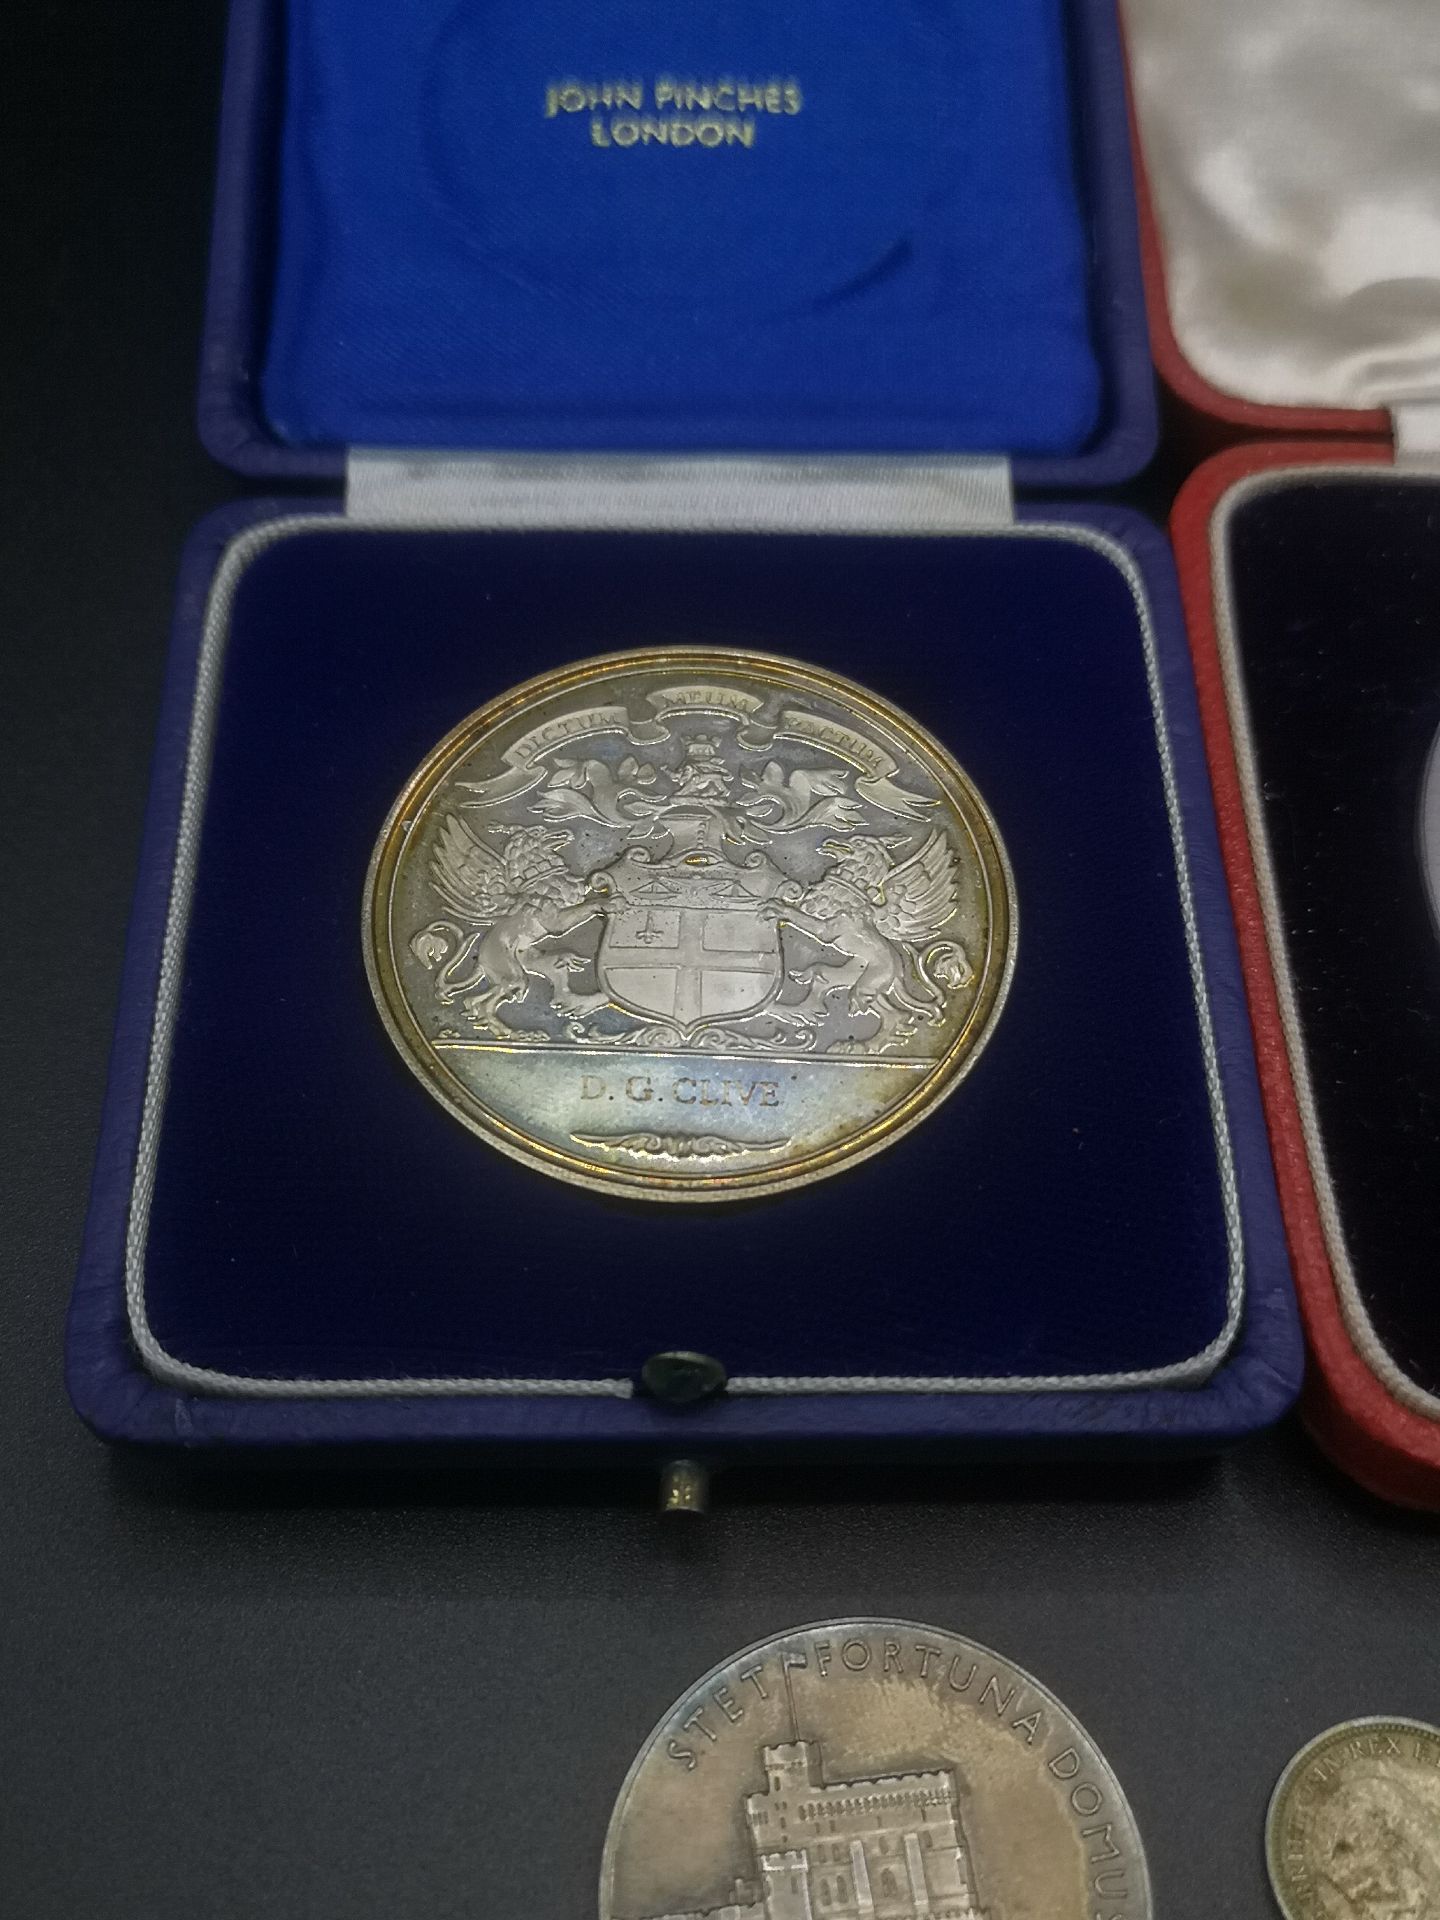 A Brokers' Medal, two other medals and coins - Image 4 of 5